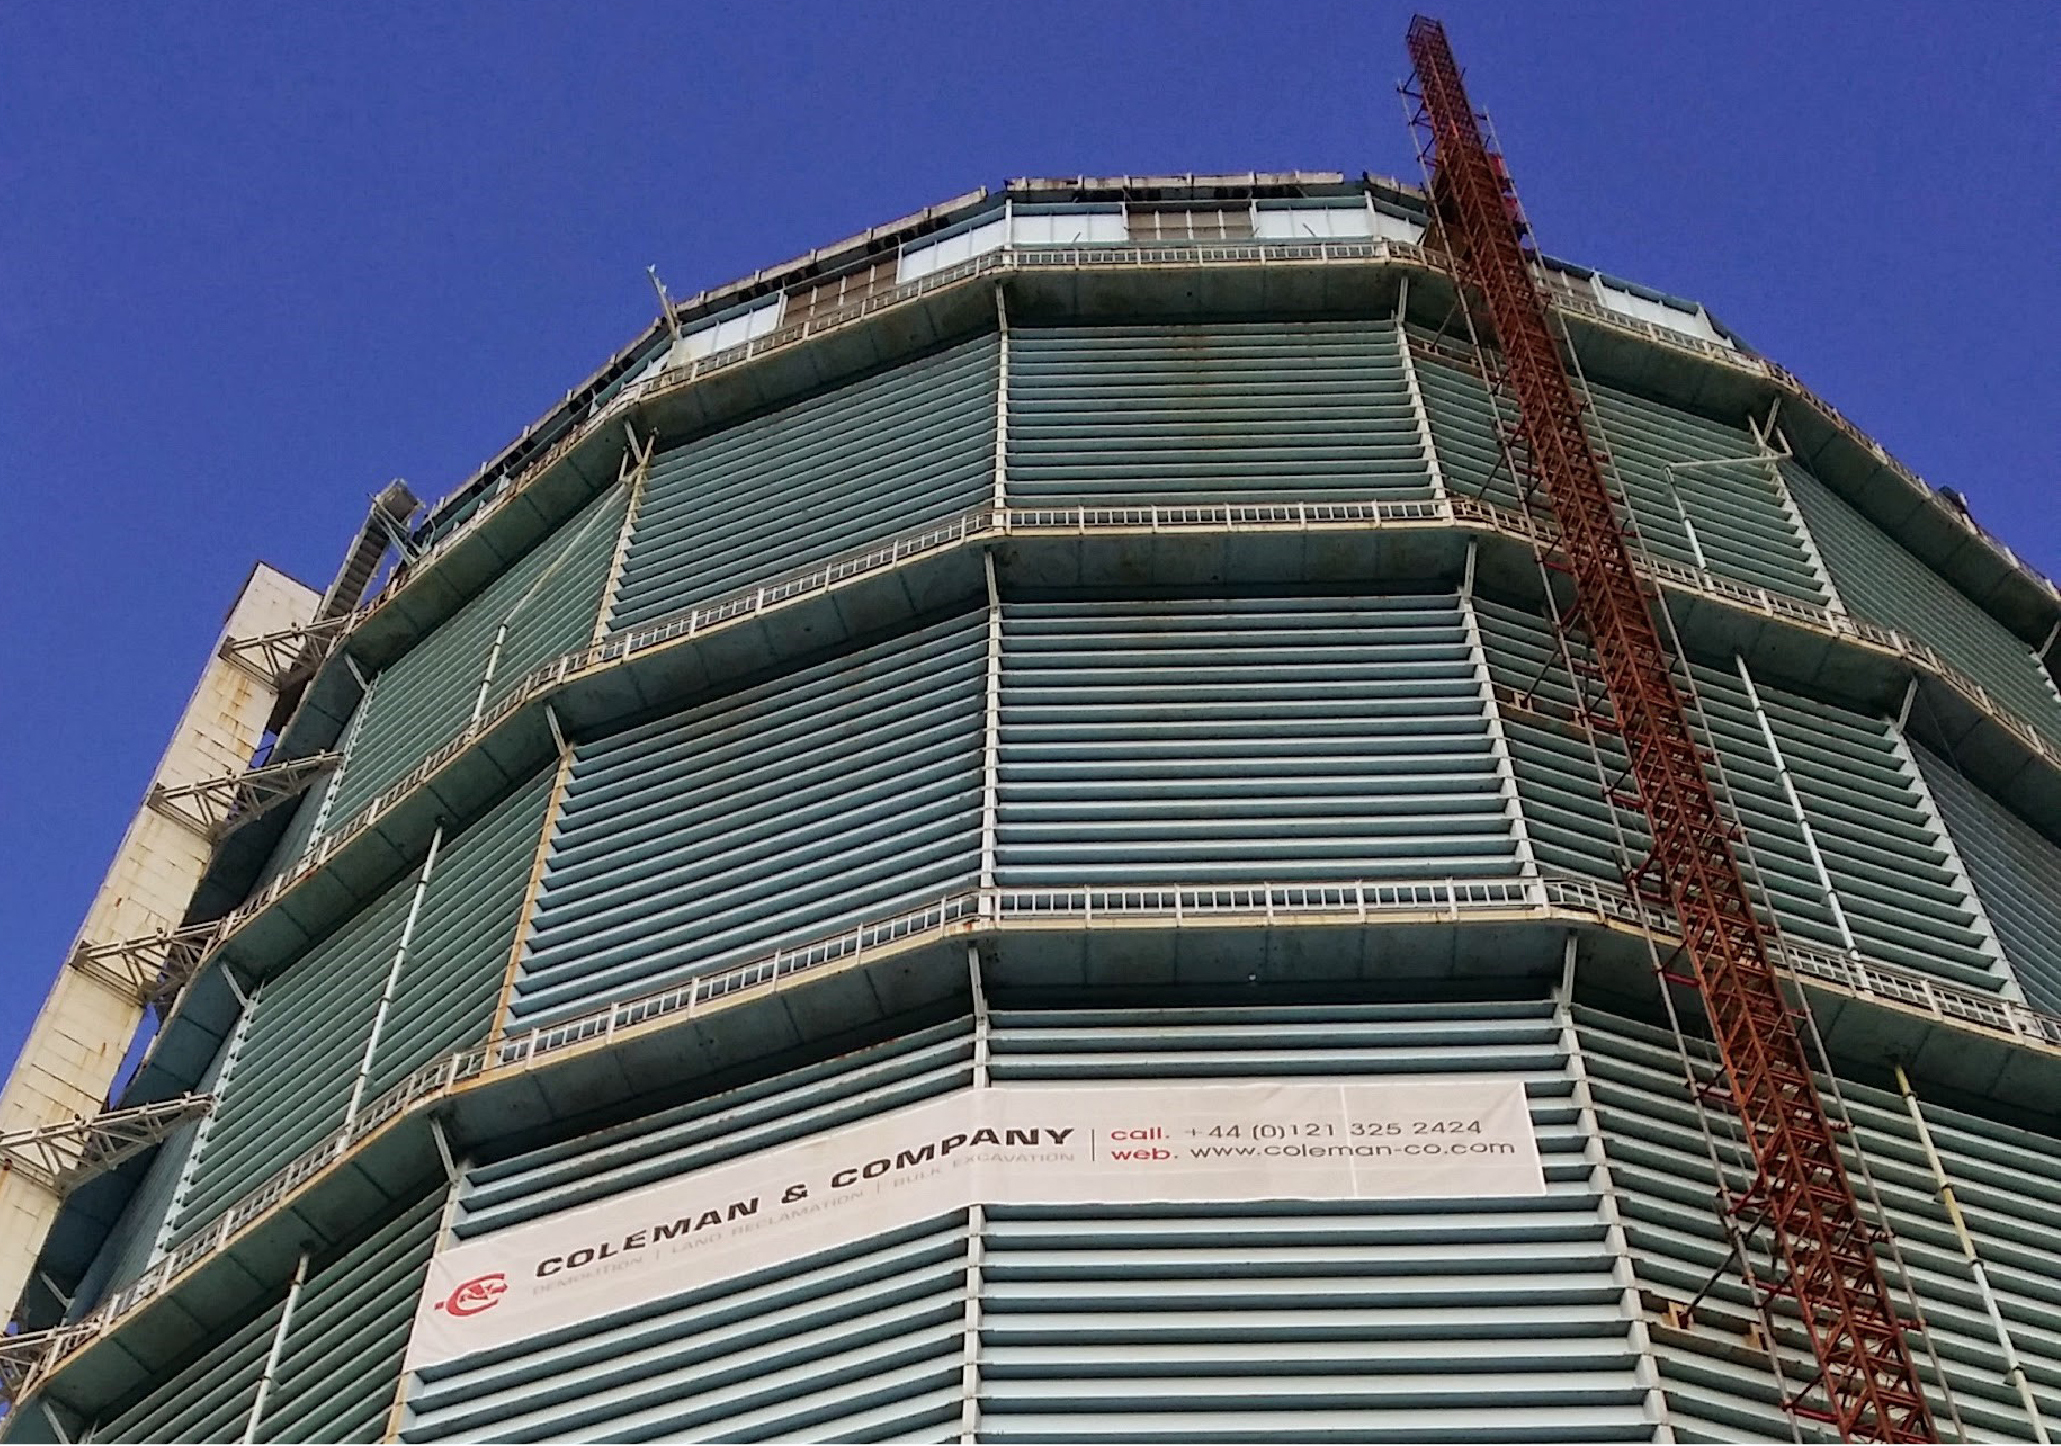 Battersea Gas holder with Colemans branded banner on the front of it.